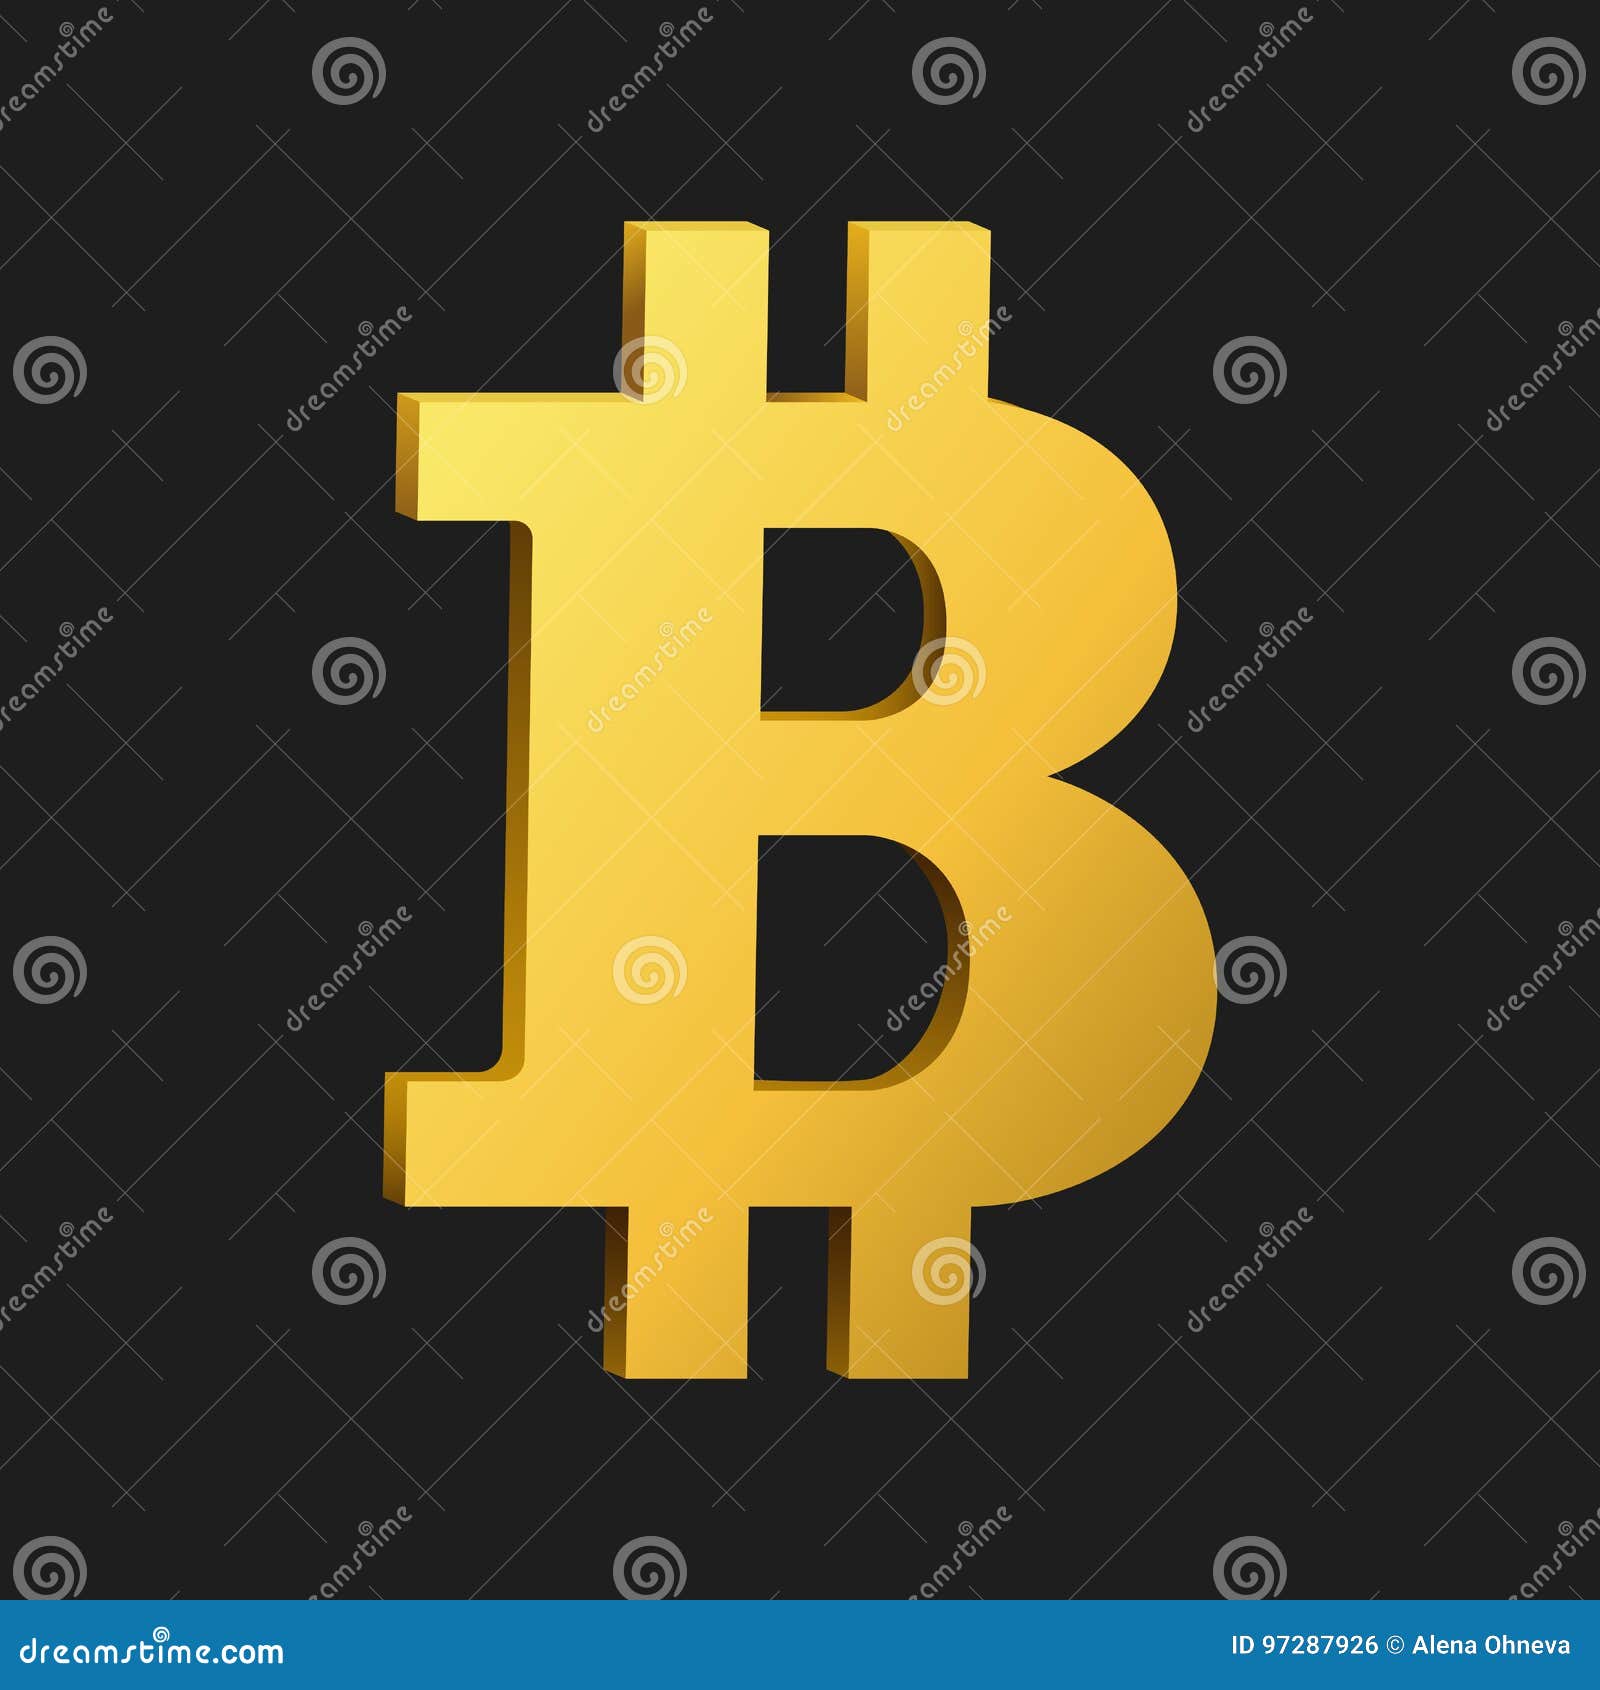 Golden Bitcoin Symbol Isolated On Black Background. Stock Vector